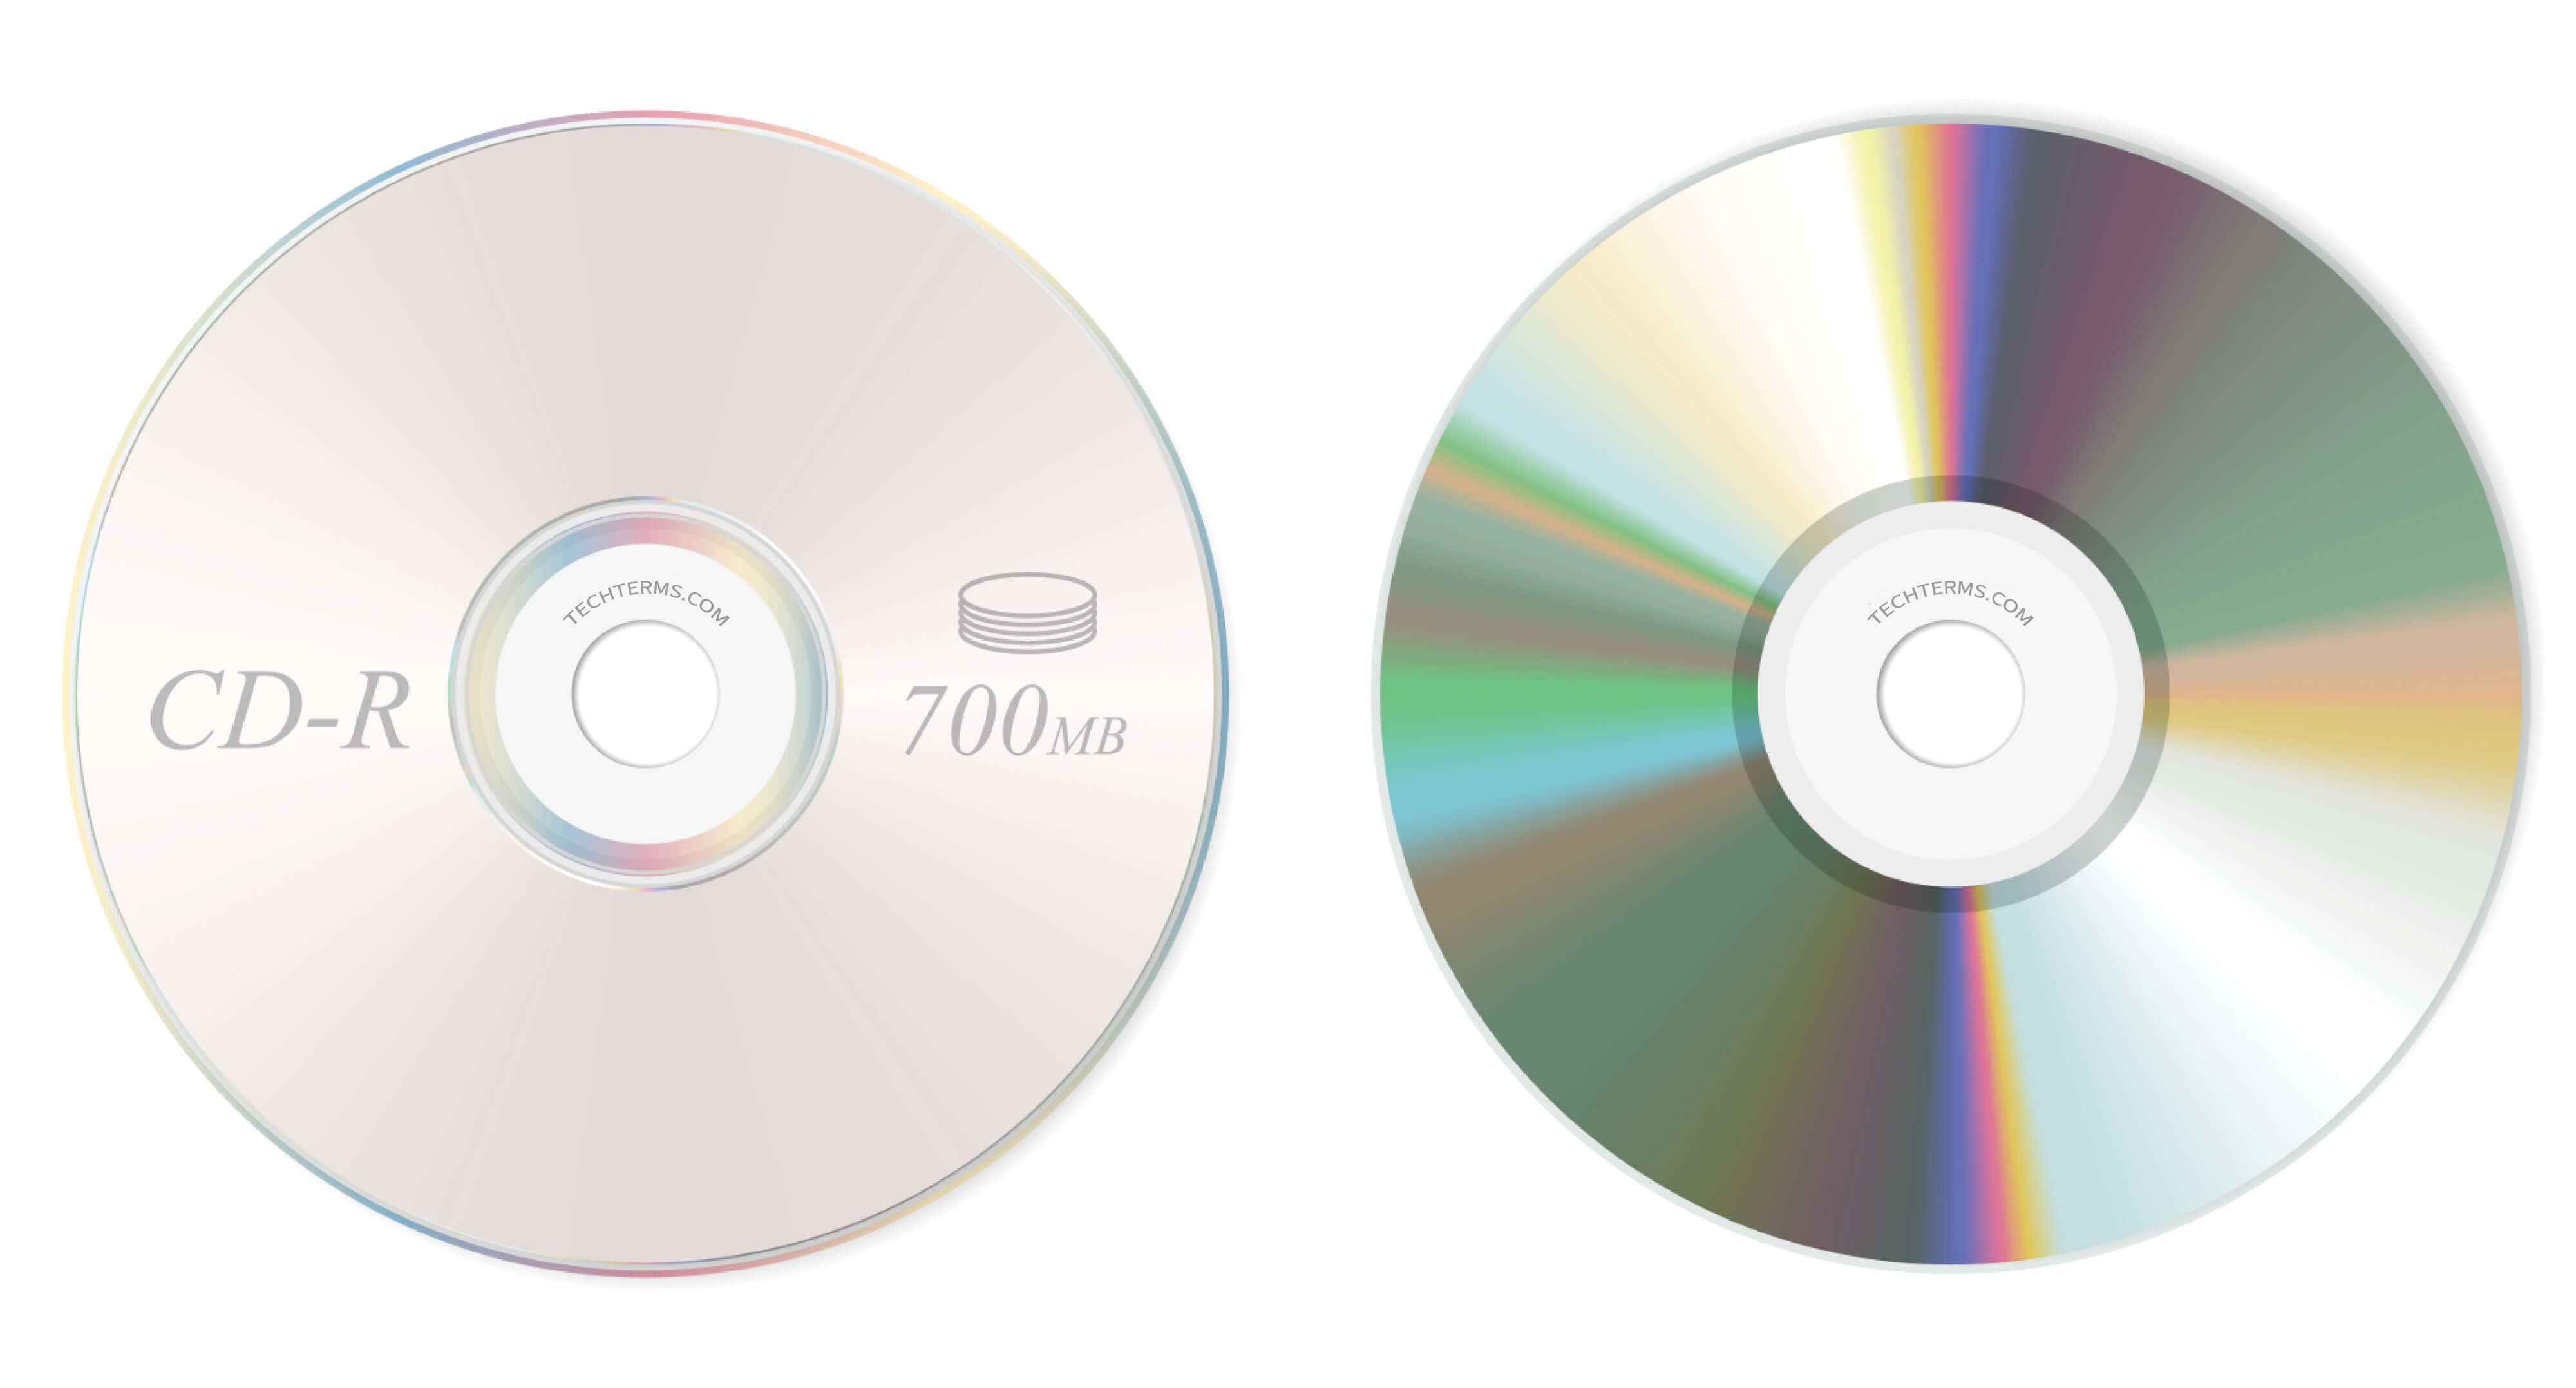 CD-R Definition - What is a CD-R disc?